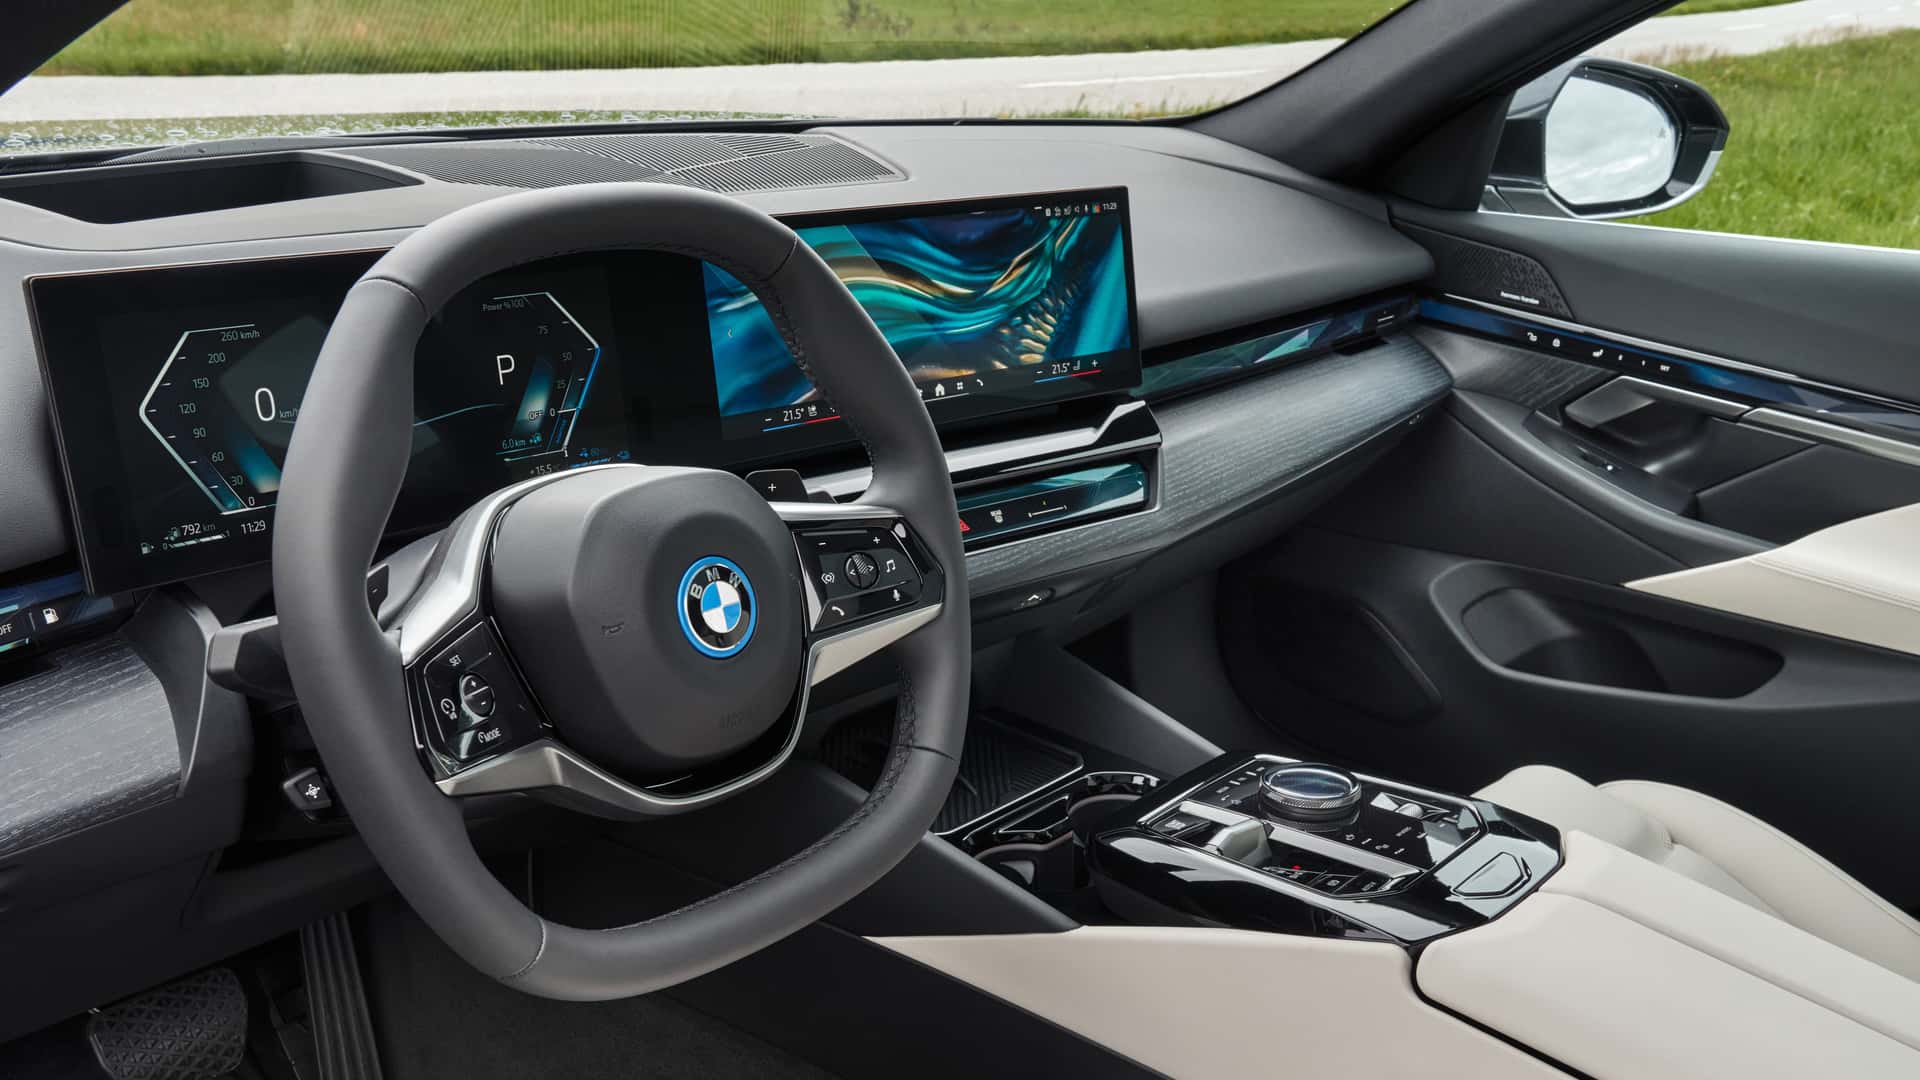 bmw and toyota wireless chargers may damage iphone 15’s nfc chip